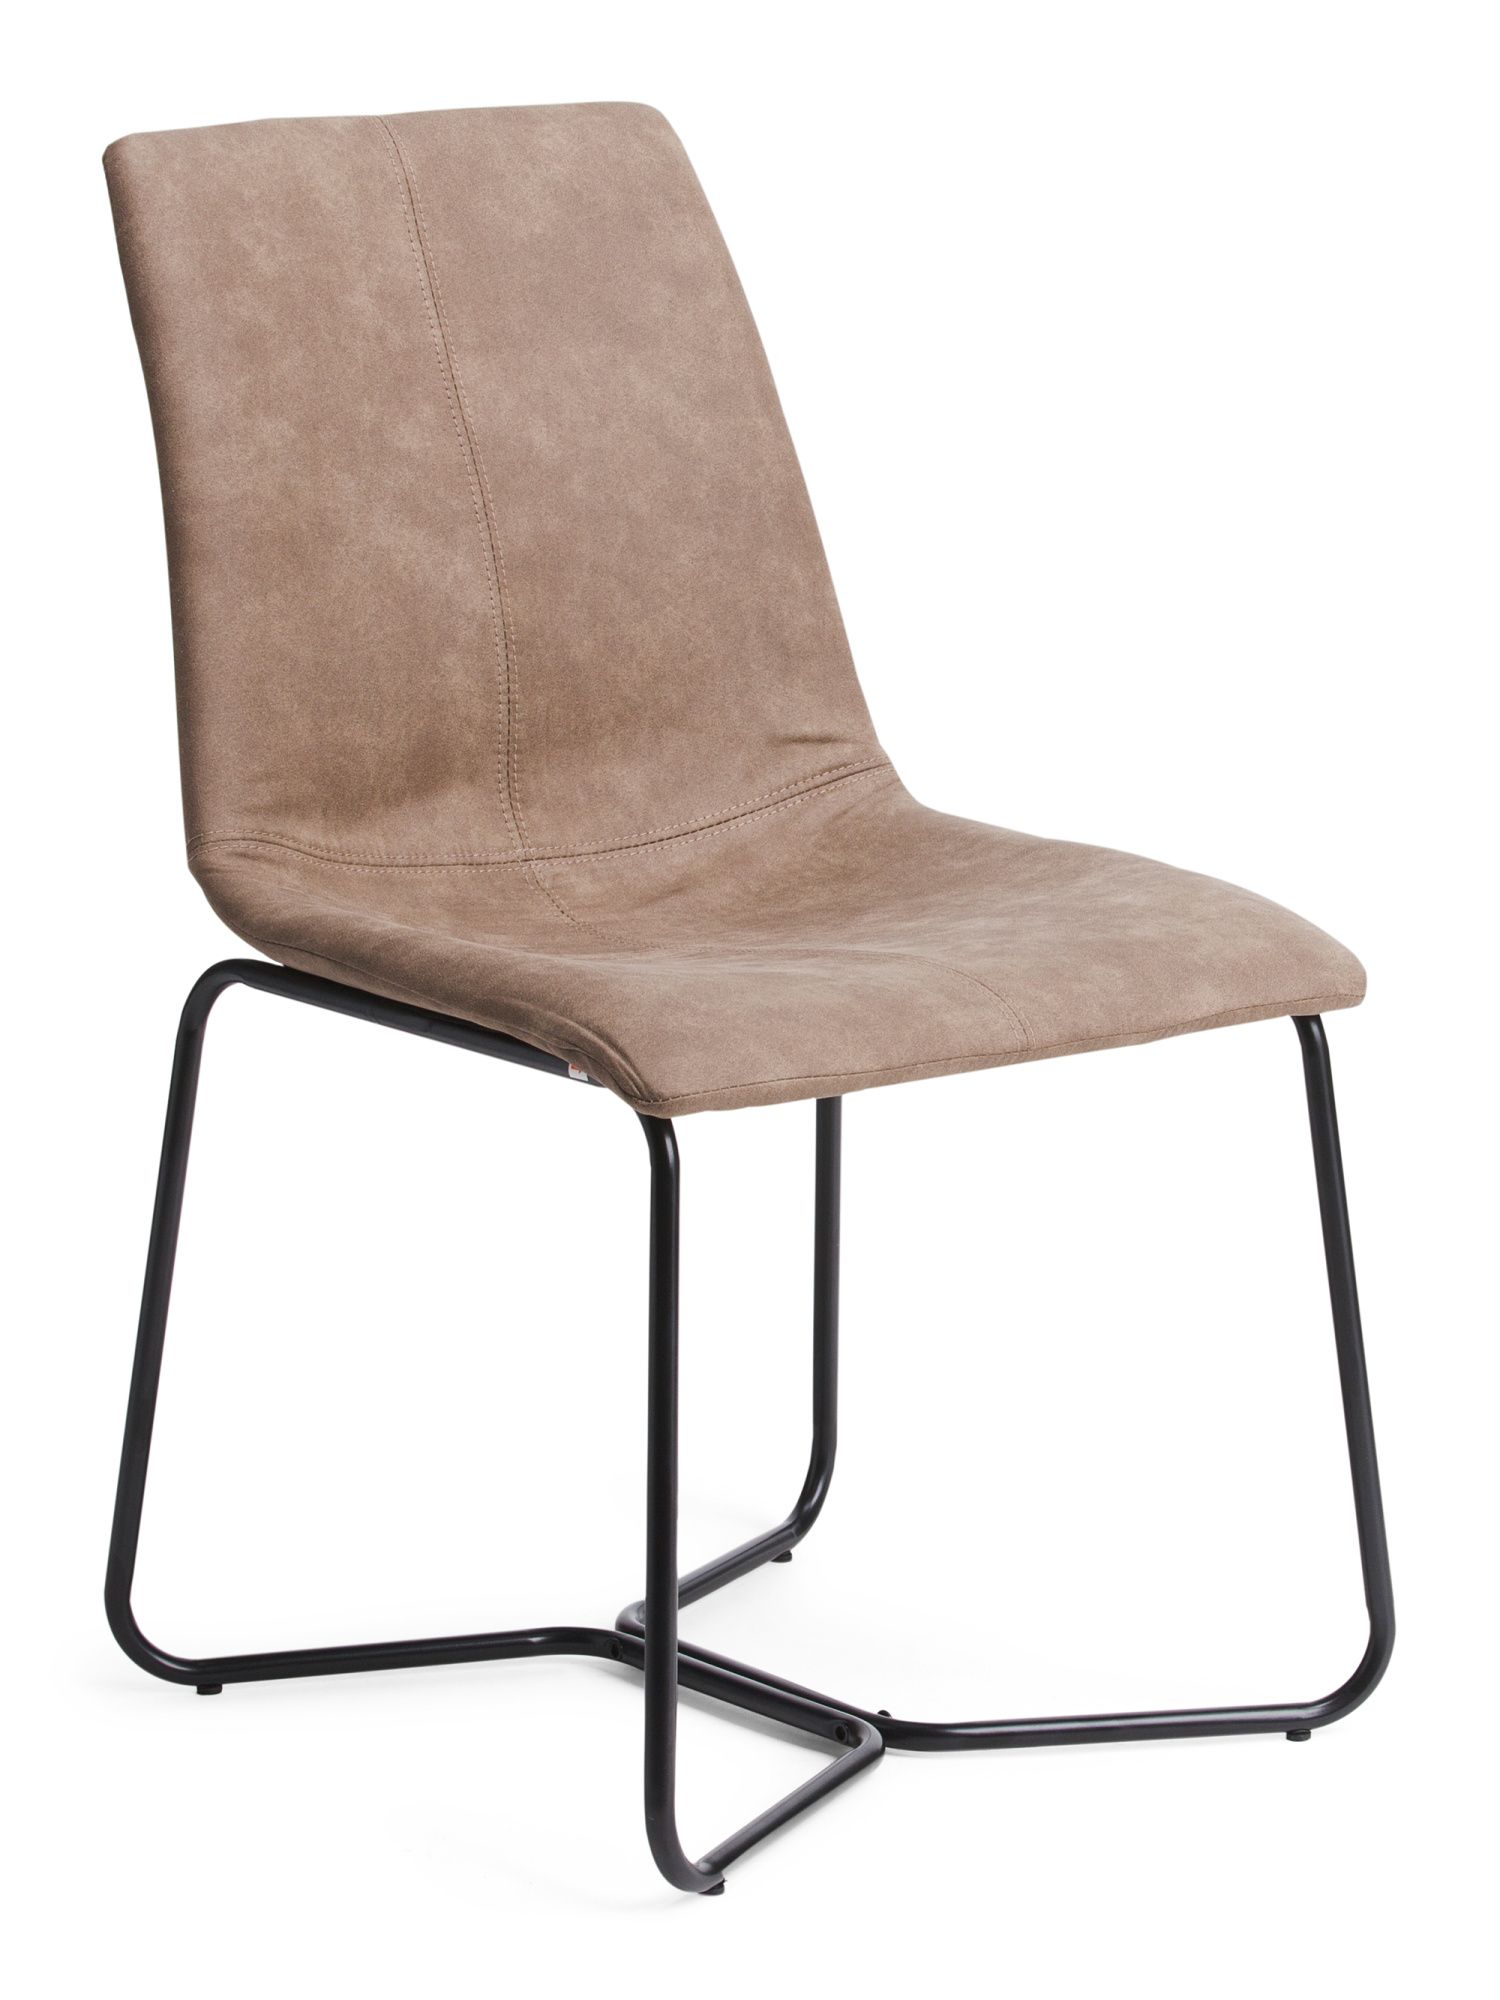 Chase Dining Chair | TJ Maxx